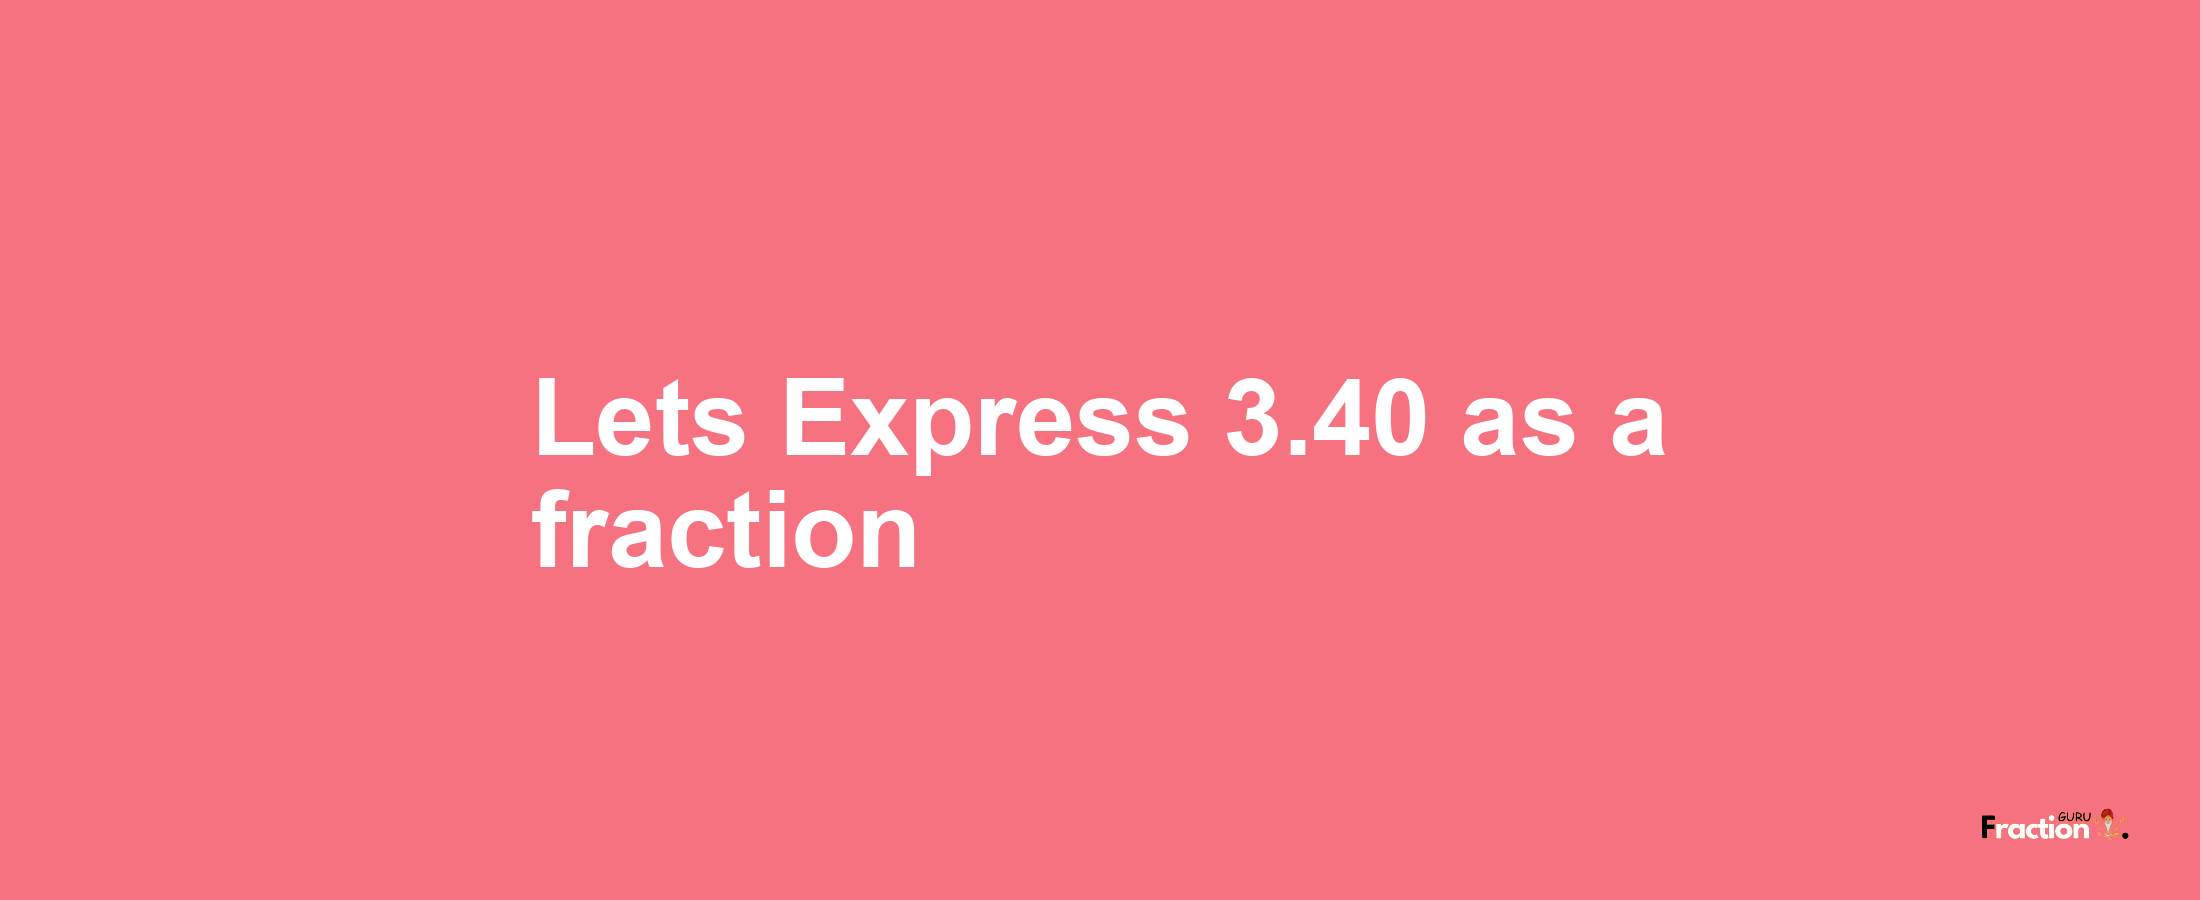 Lets Express 3.40 as afraction